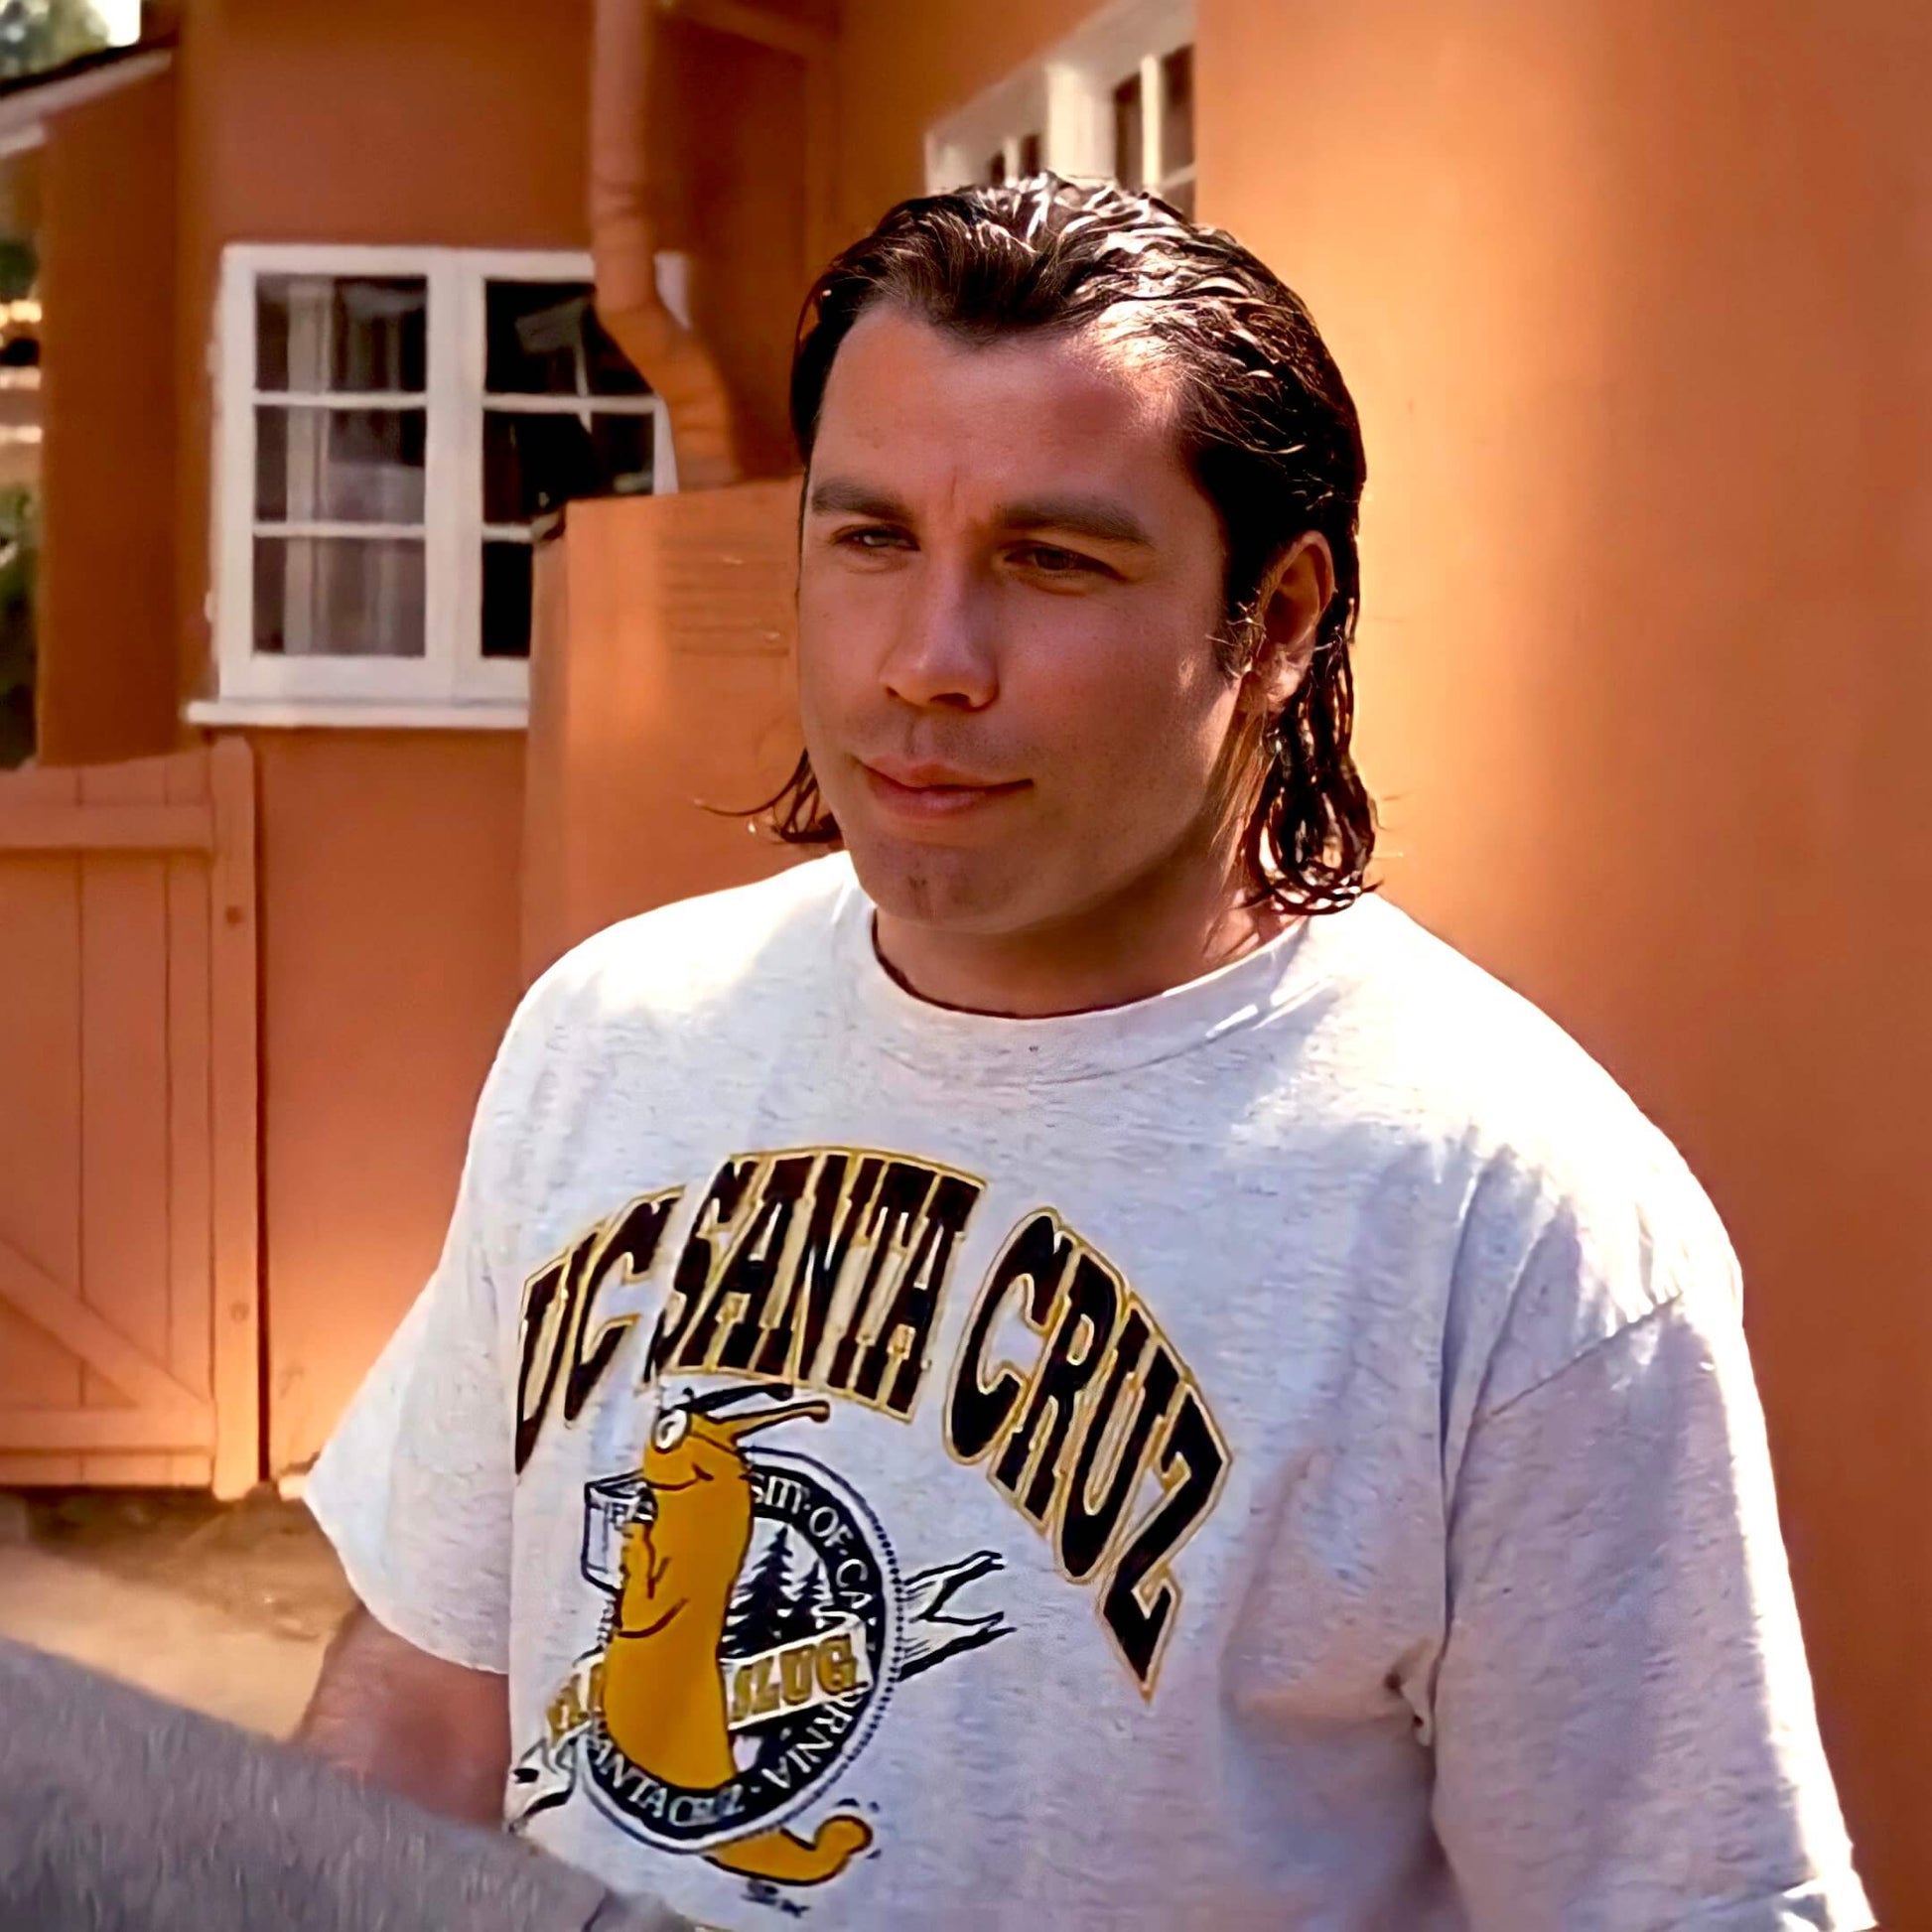 Experience the legendary character of Vincent Vega with our Santa Cruz t-shirt design, featuring a vibrant and durable print that captures the spirit of Pulp Fiction. Made from high-quality cotton, this shirt is a great addition to any wardrobe